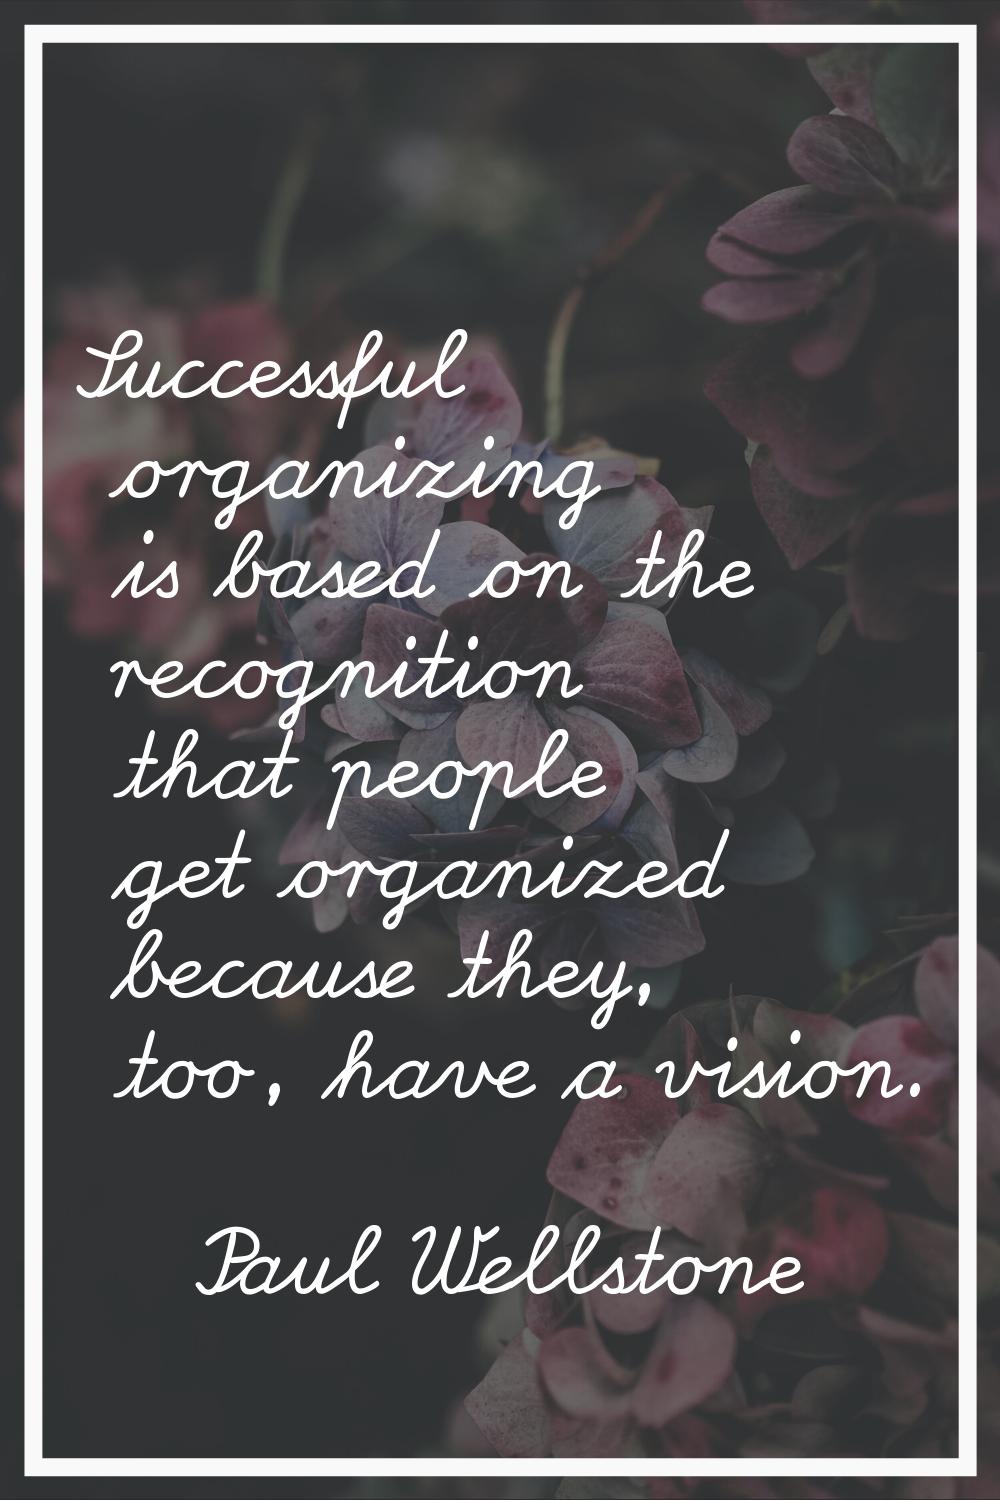 Successful organizing is based on the recognition that people get organized because they, too, have